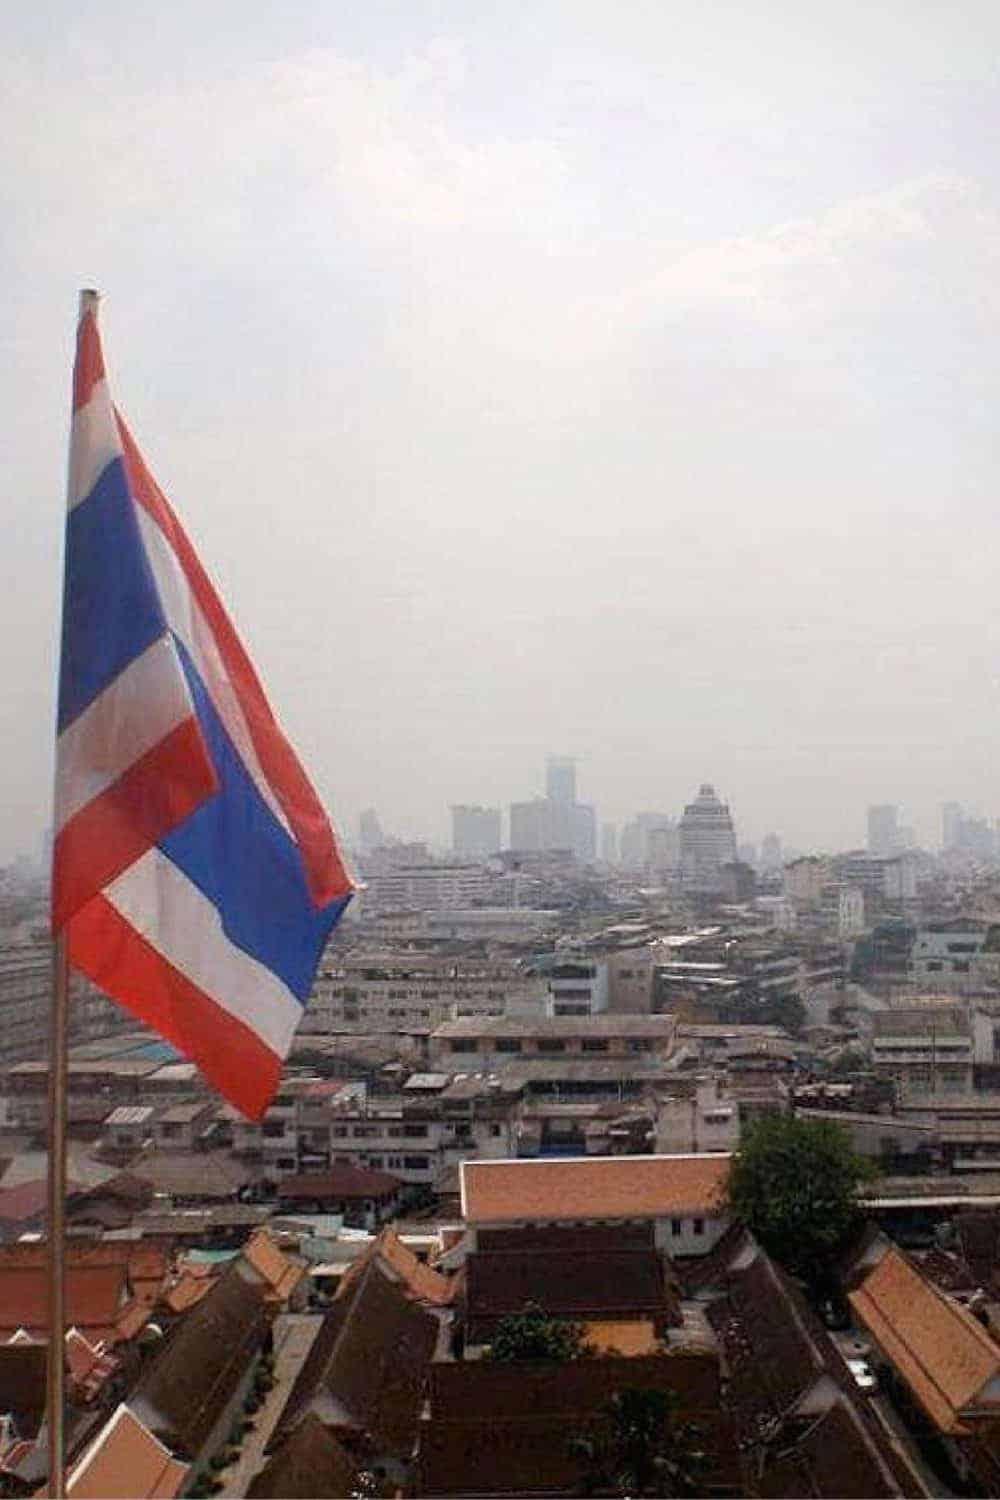 The Thai flag with a city view